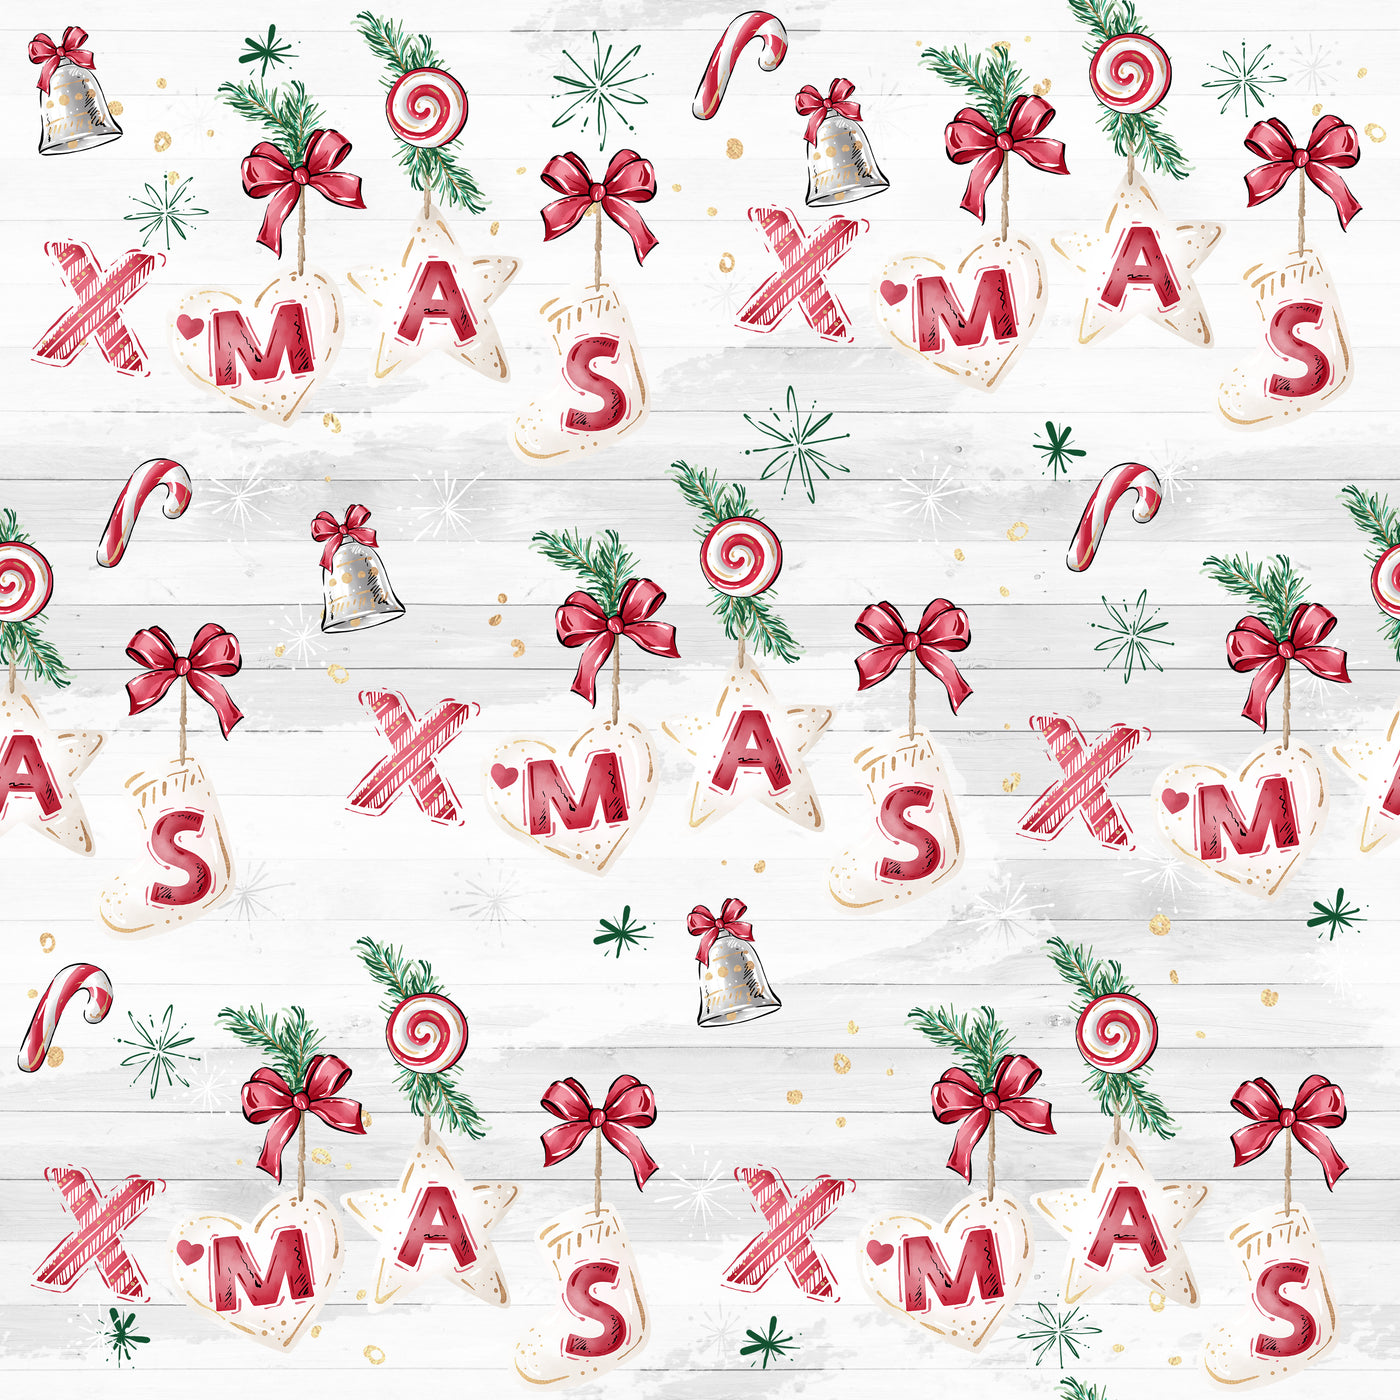 Adhesive Patterned Vinyl - Christmas Gnome 1